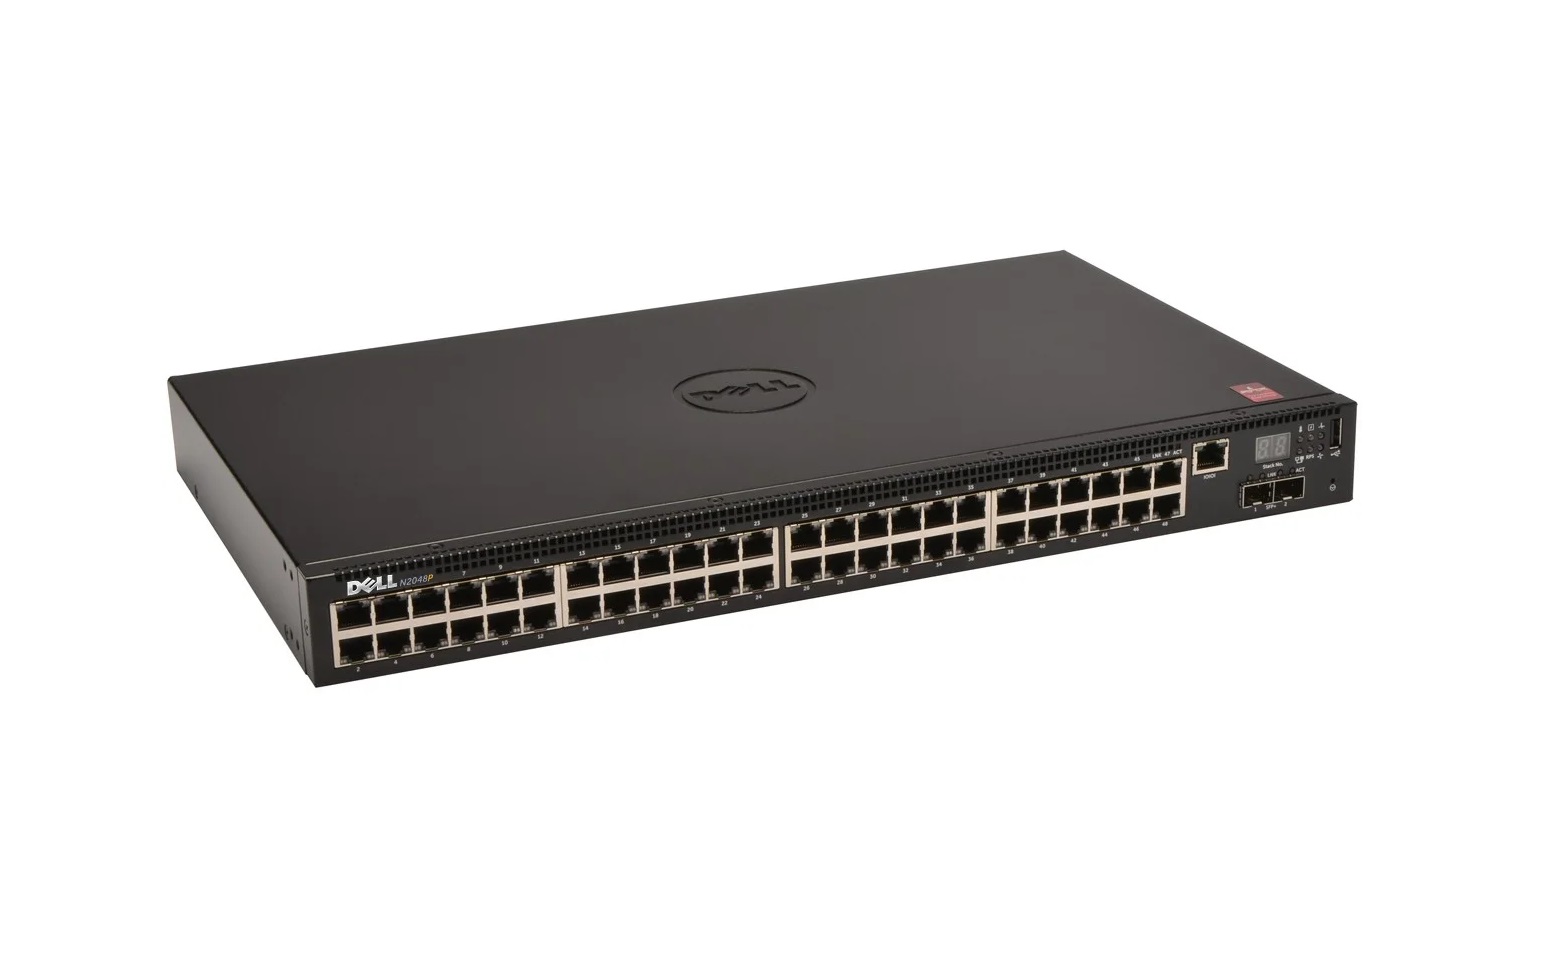 Dell N2048p Managed L3 Switch 48 POE+ Ethernet Ports and 2 10- Gigabit SFP+ Ports